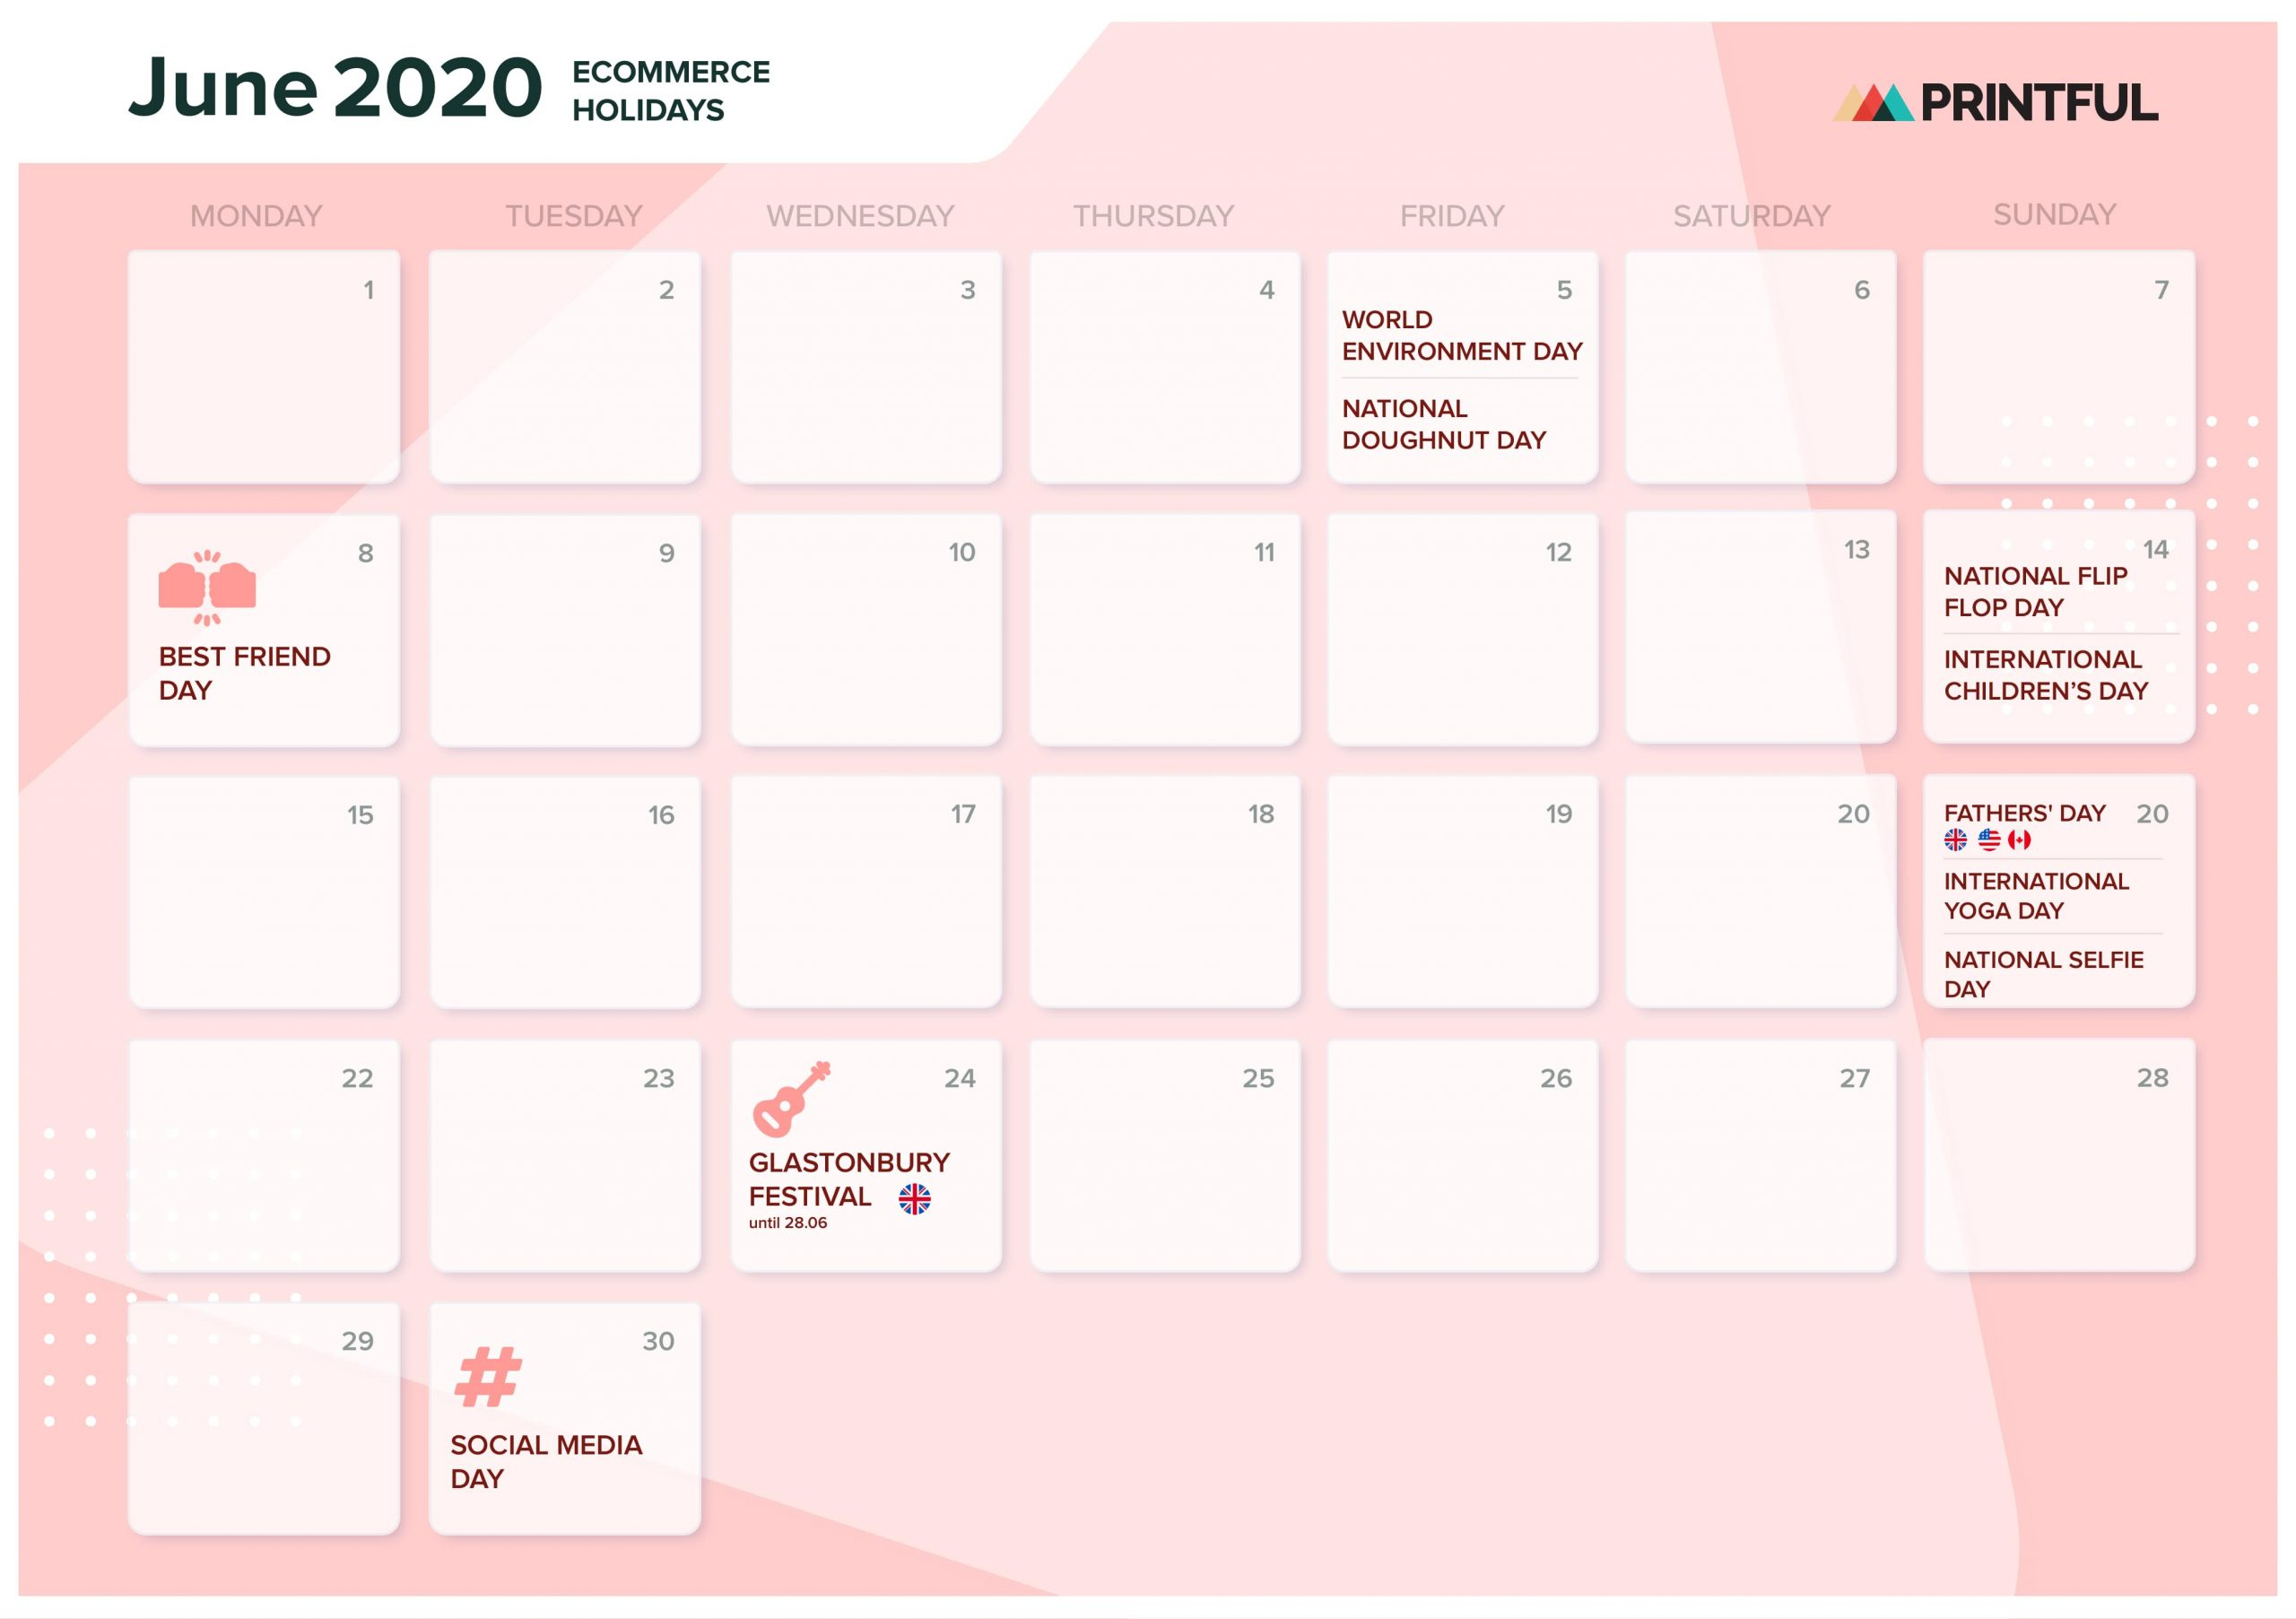 The Ultimate 2020 Ecommerce Holiday Marketing Calendar with Q4 Calendar 2020